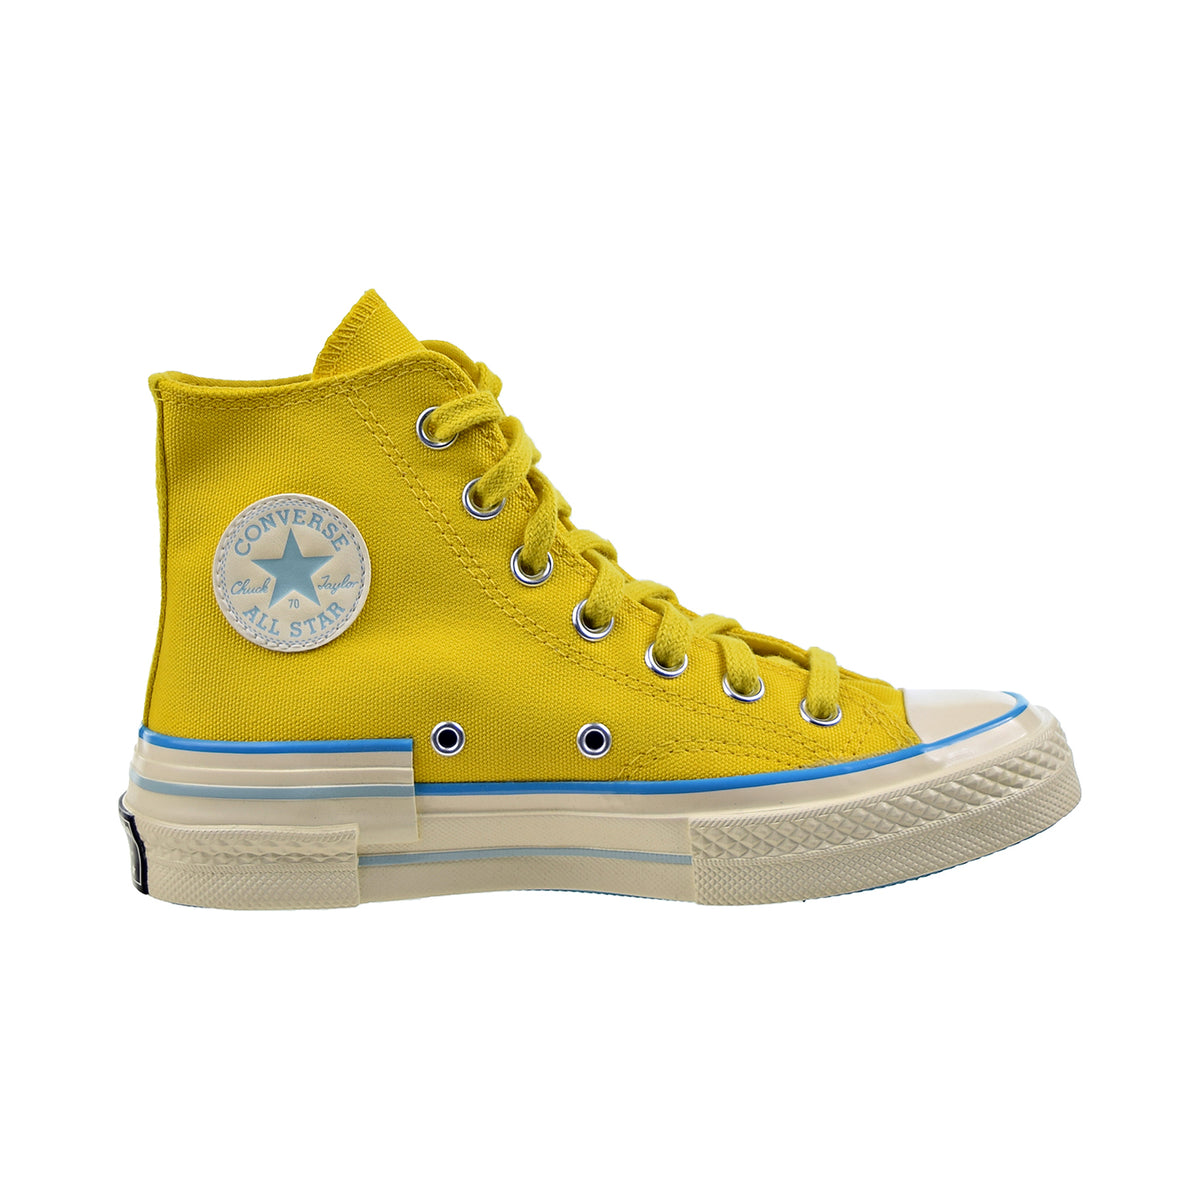 Converse Chuck 70 Hi "Popped Color" Women's Shoes Speed Bl